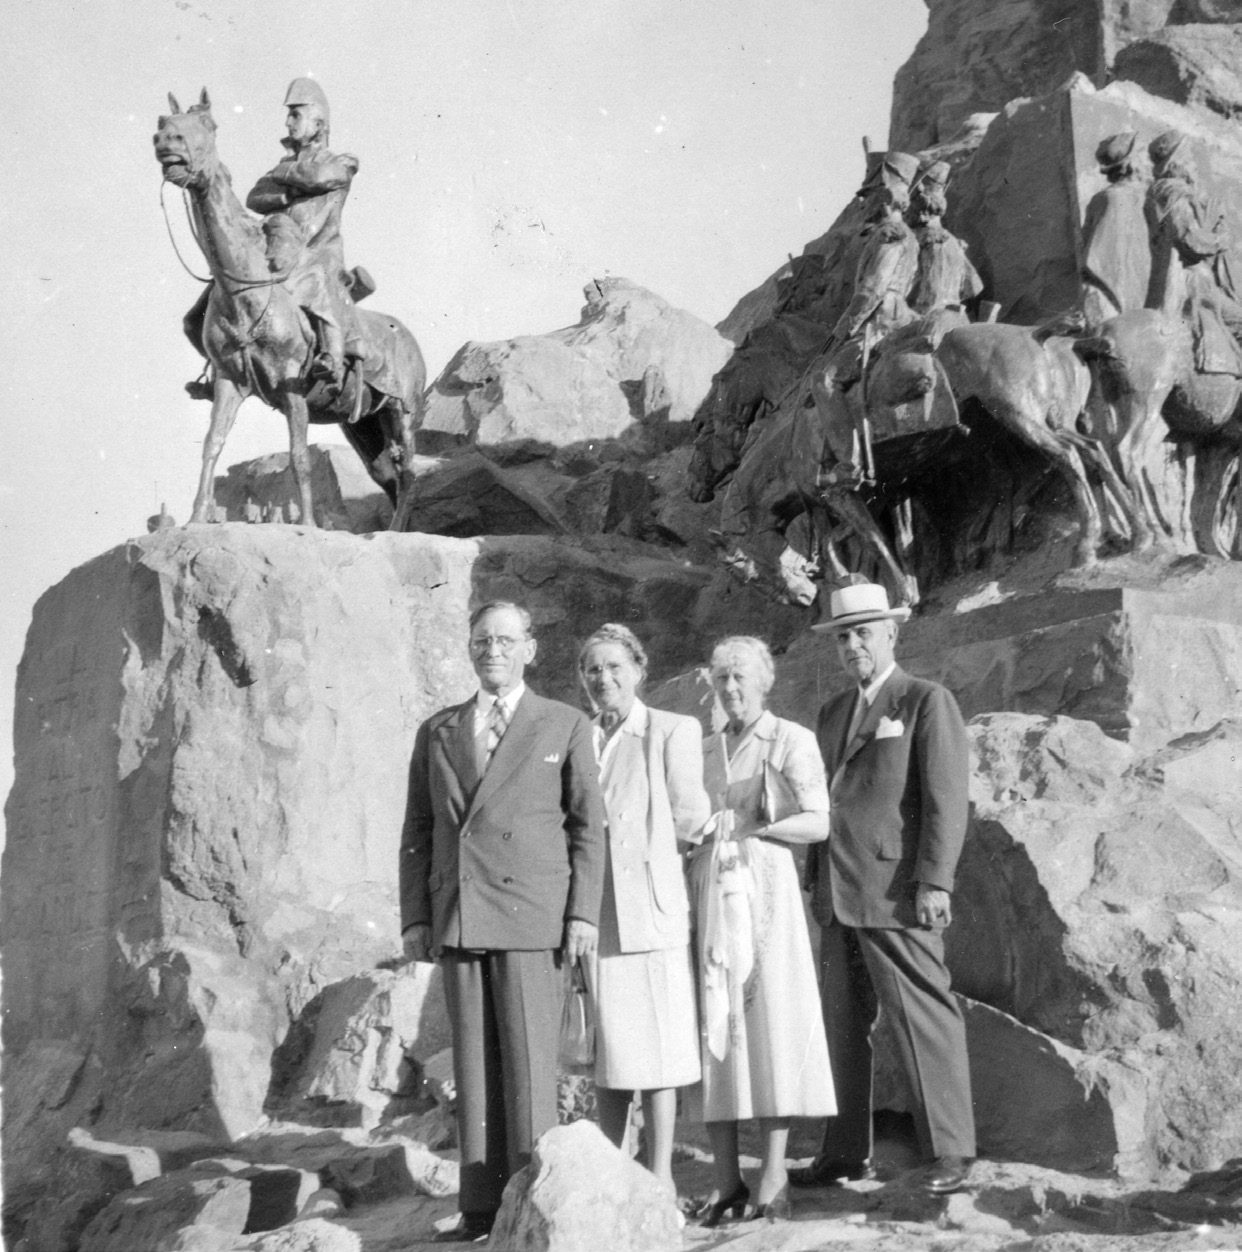 The Youngs and the Richardses in front of the monument “Hill of Glory” in Mendoza, a tribute to the army of the Andes. Courtesy of CHL.